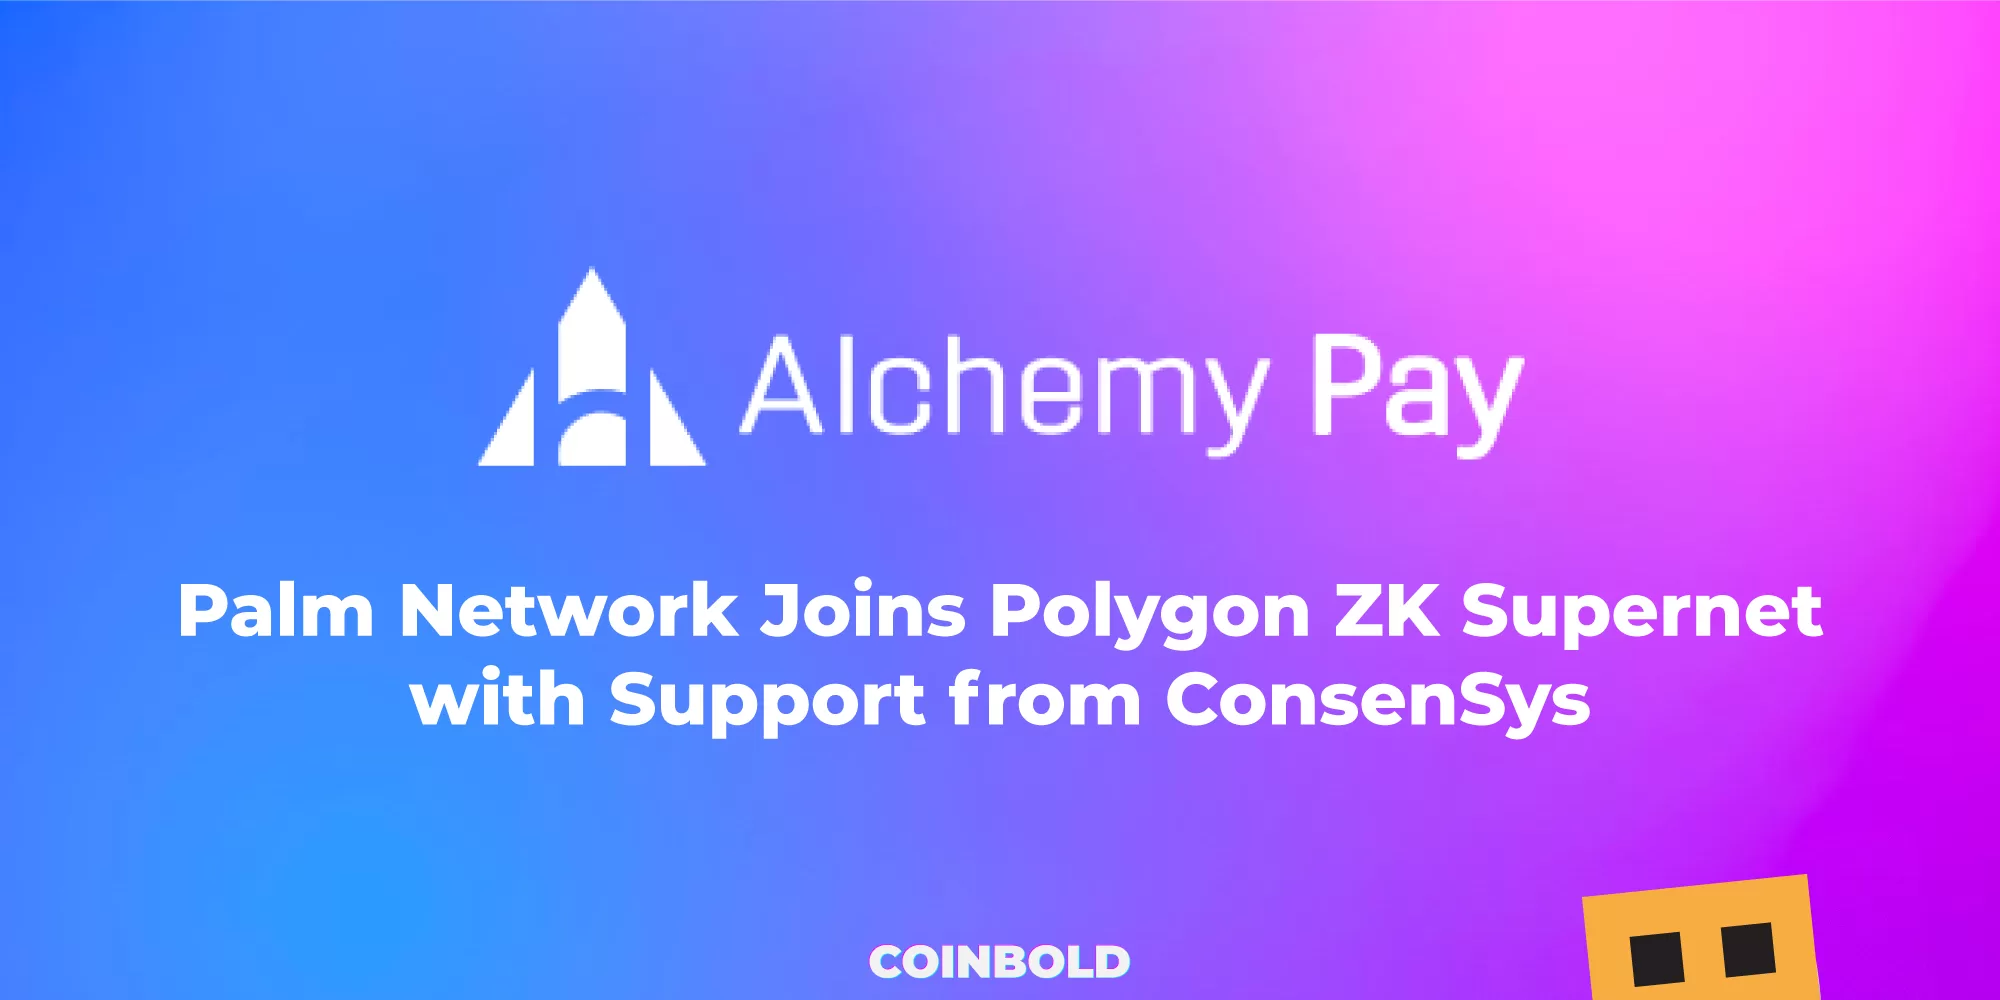 Alchemy Pay and Checkout.com Partner to Boost Crypto Payments Worldwide